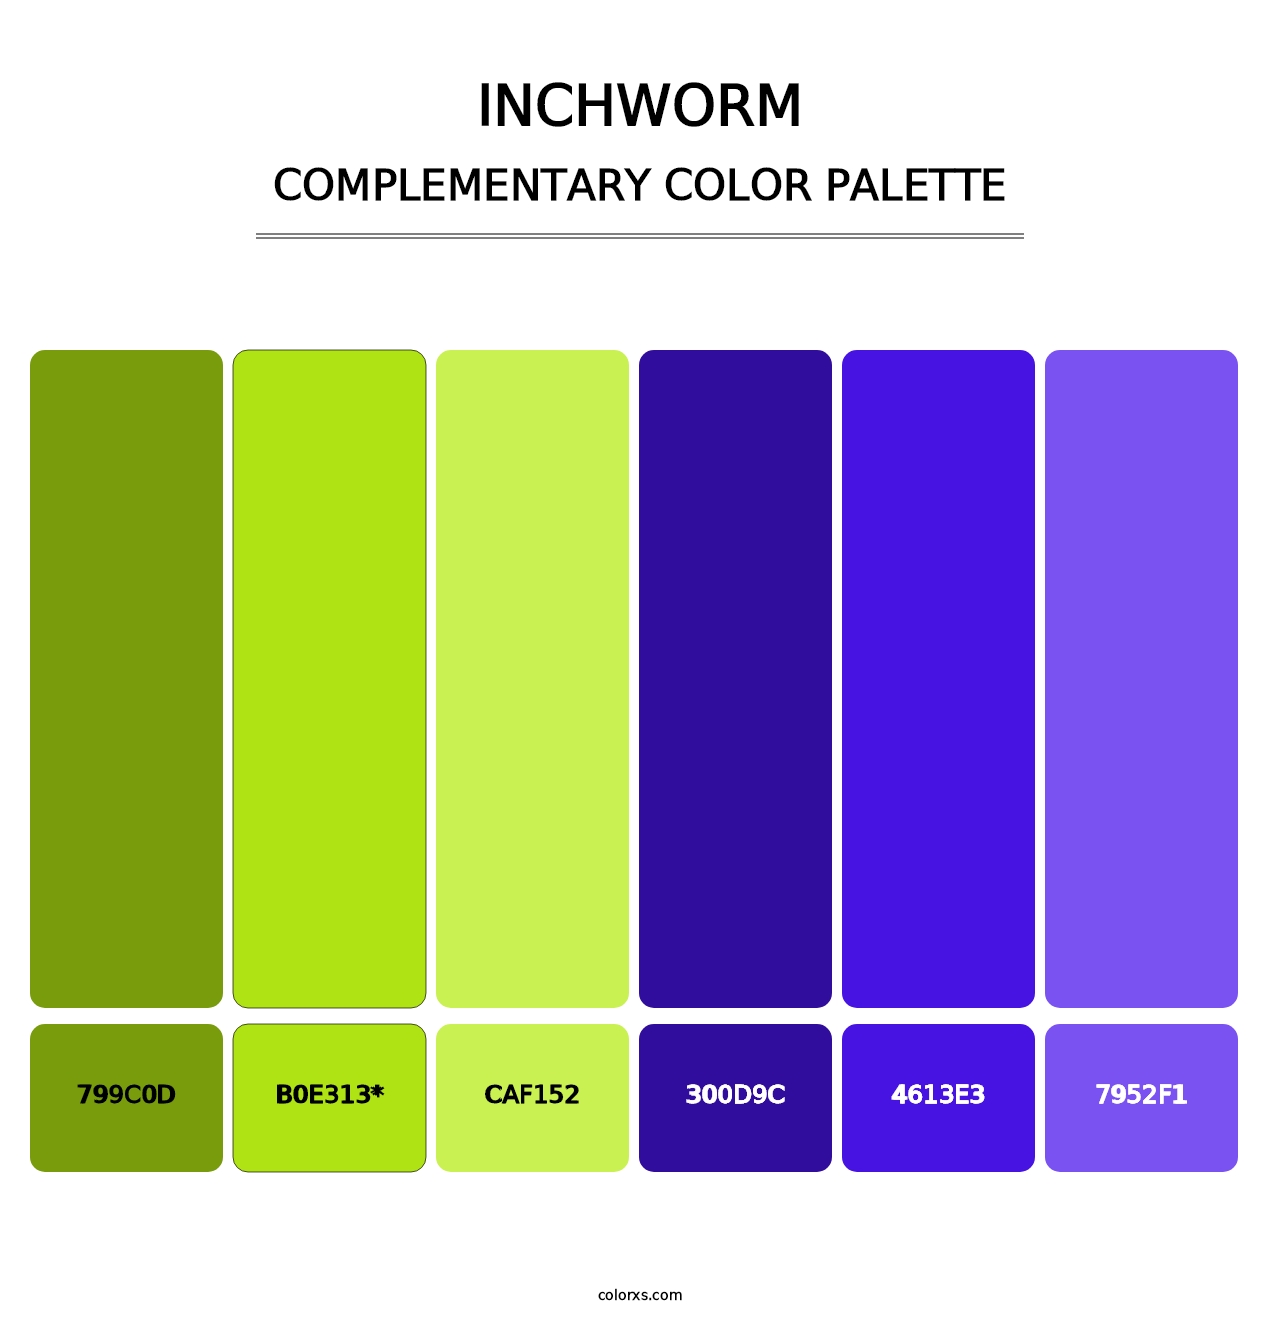 Inchworm - Complementary Color Palette